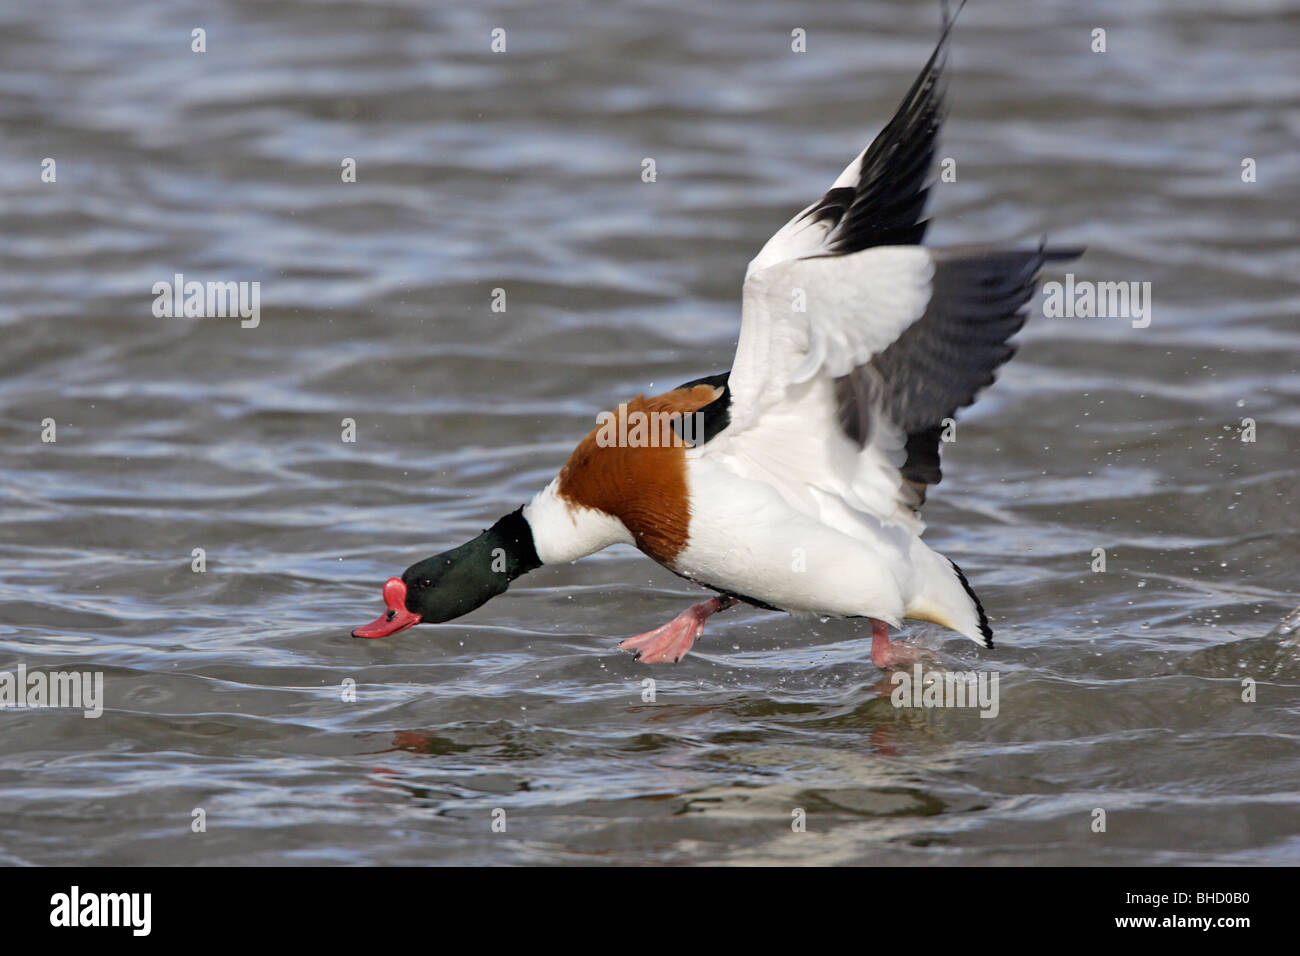 Common Shelduck coming into land on water Stock Photo